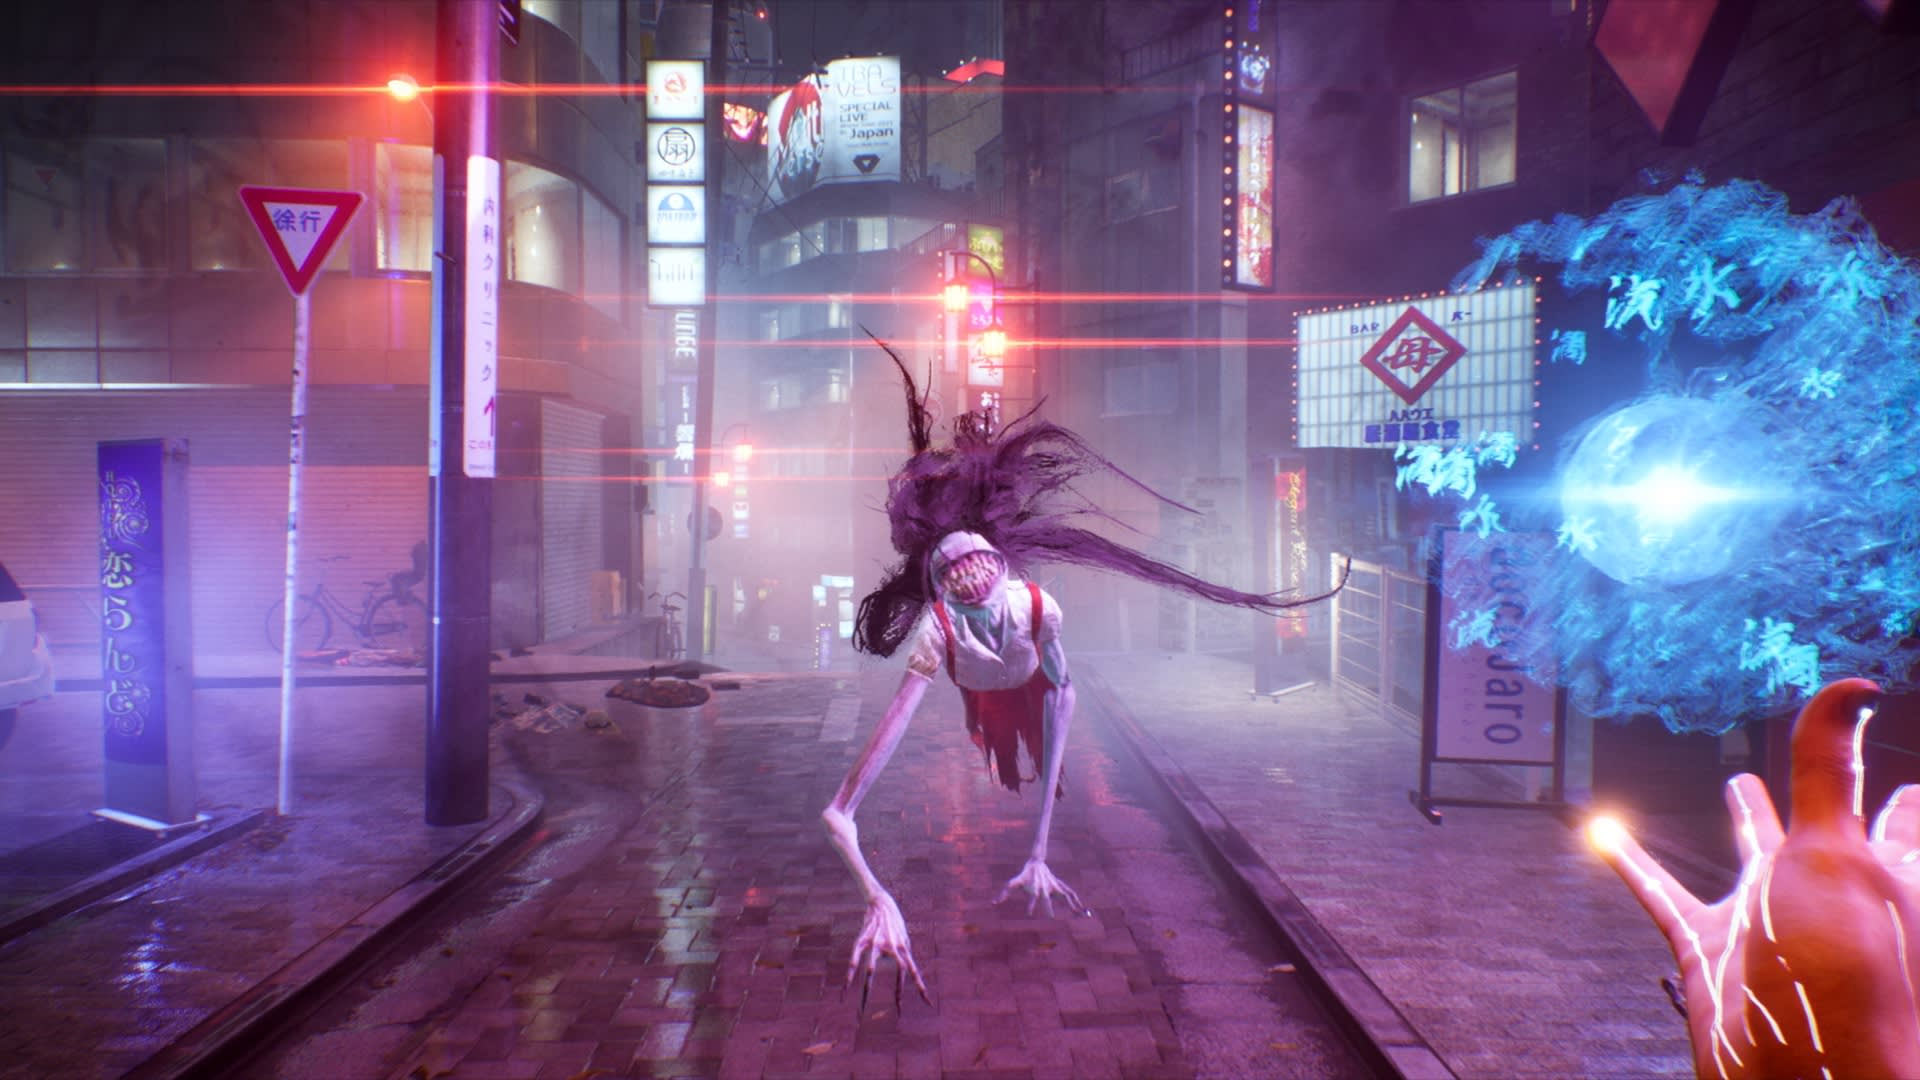 Preview Ghostwire: Tokyo - a desolate city teetering between life and death, filled with mist, magic and Japanese culture